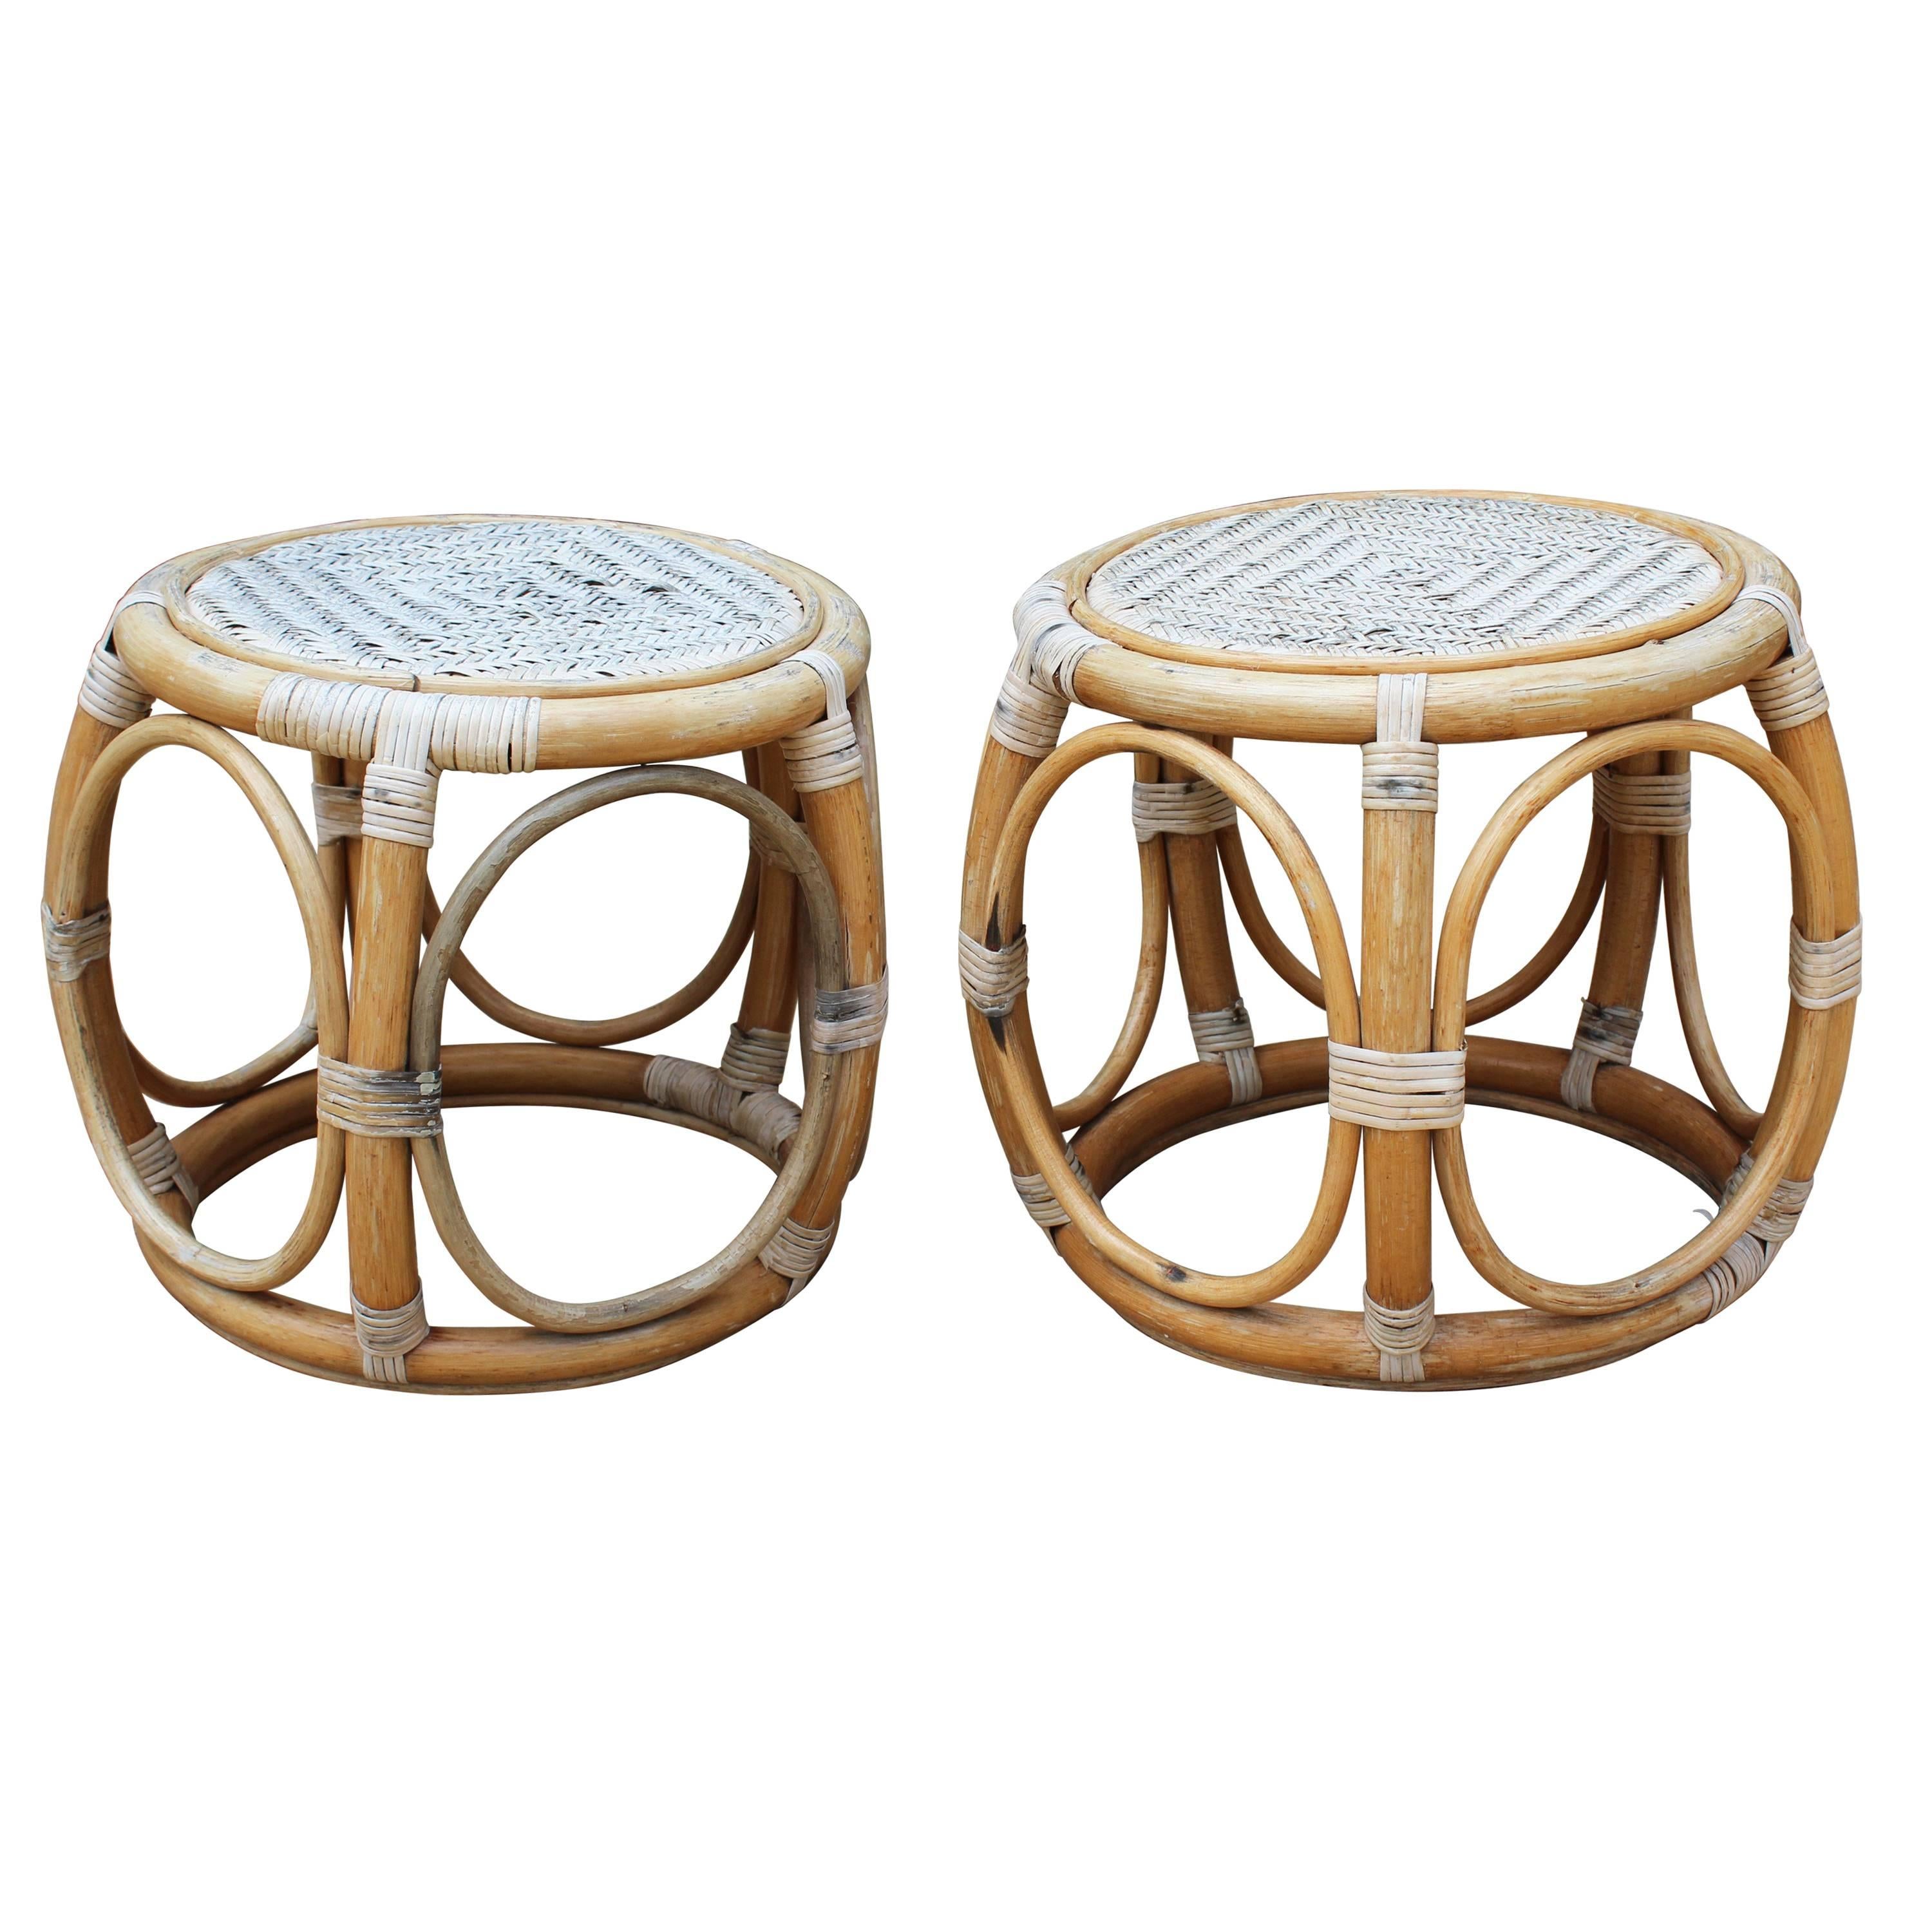 1950s Pair of Spanish Bamboo and Rattan Stools